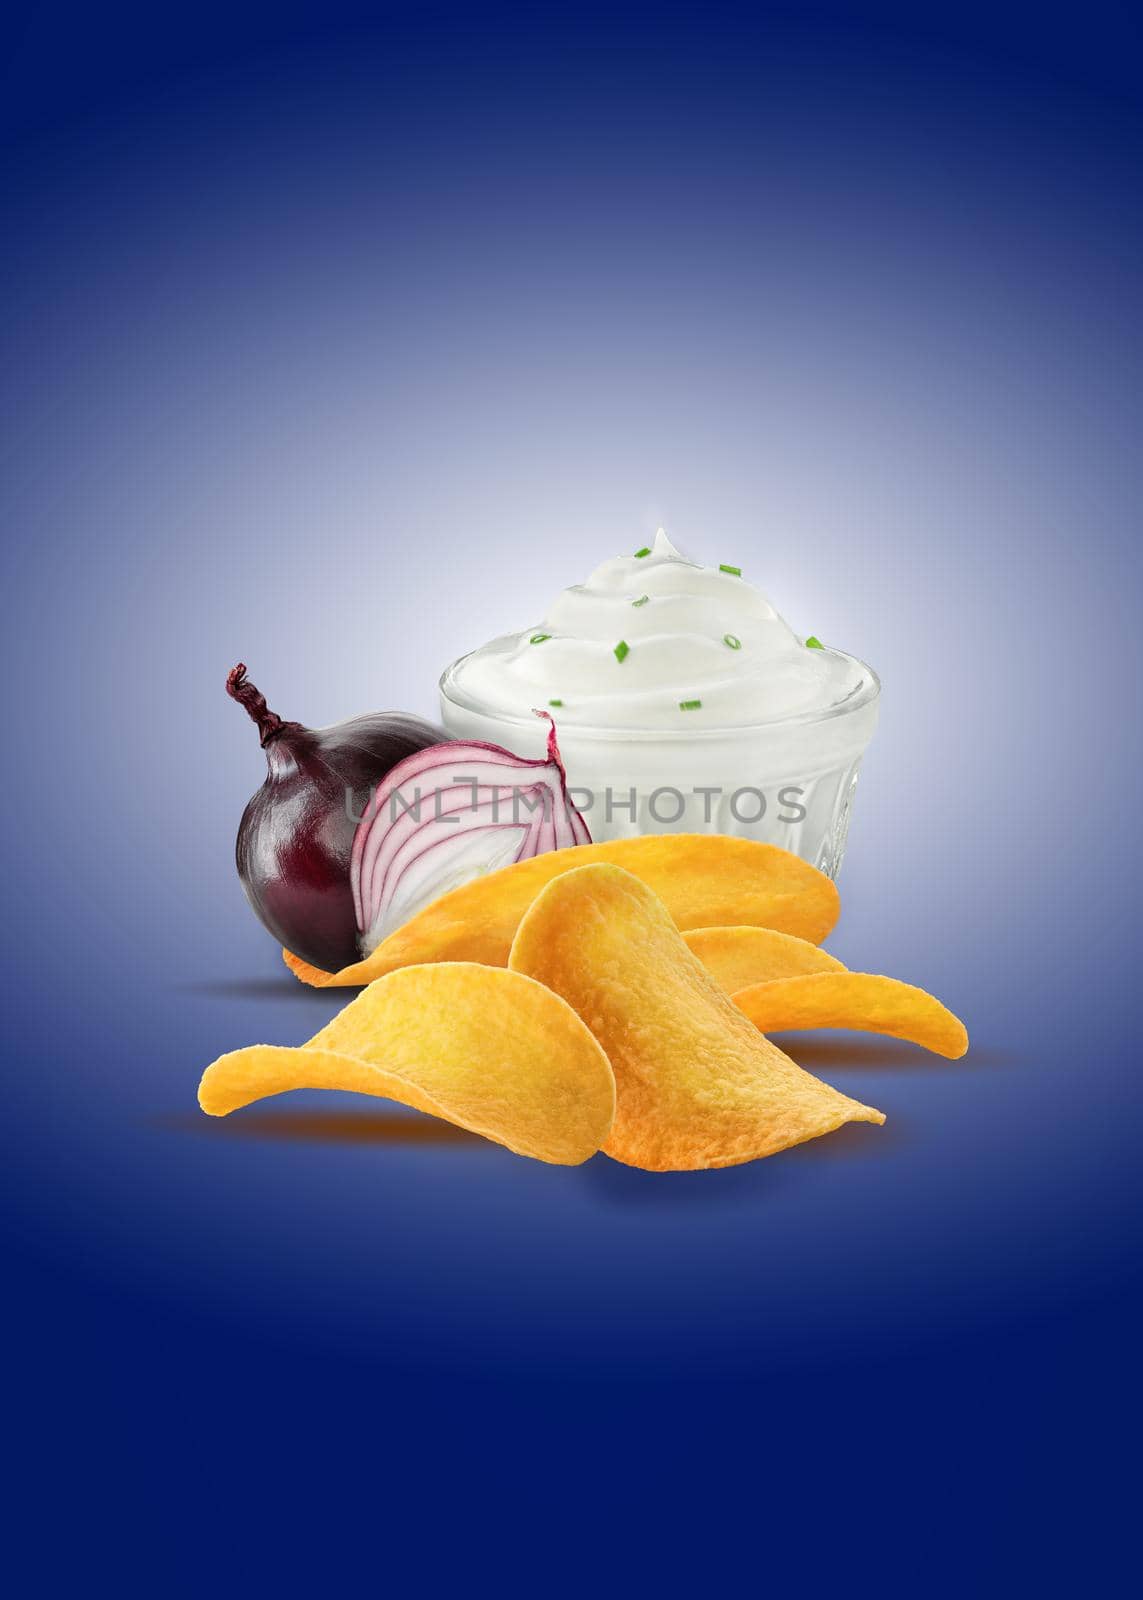 Red onion bulb and a half, sauce with green onion and chips or crisps on a blue background with copy space for text or images. Advertising. Close-up. by nazarovsergey